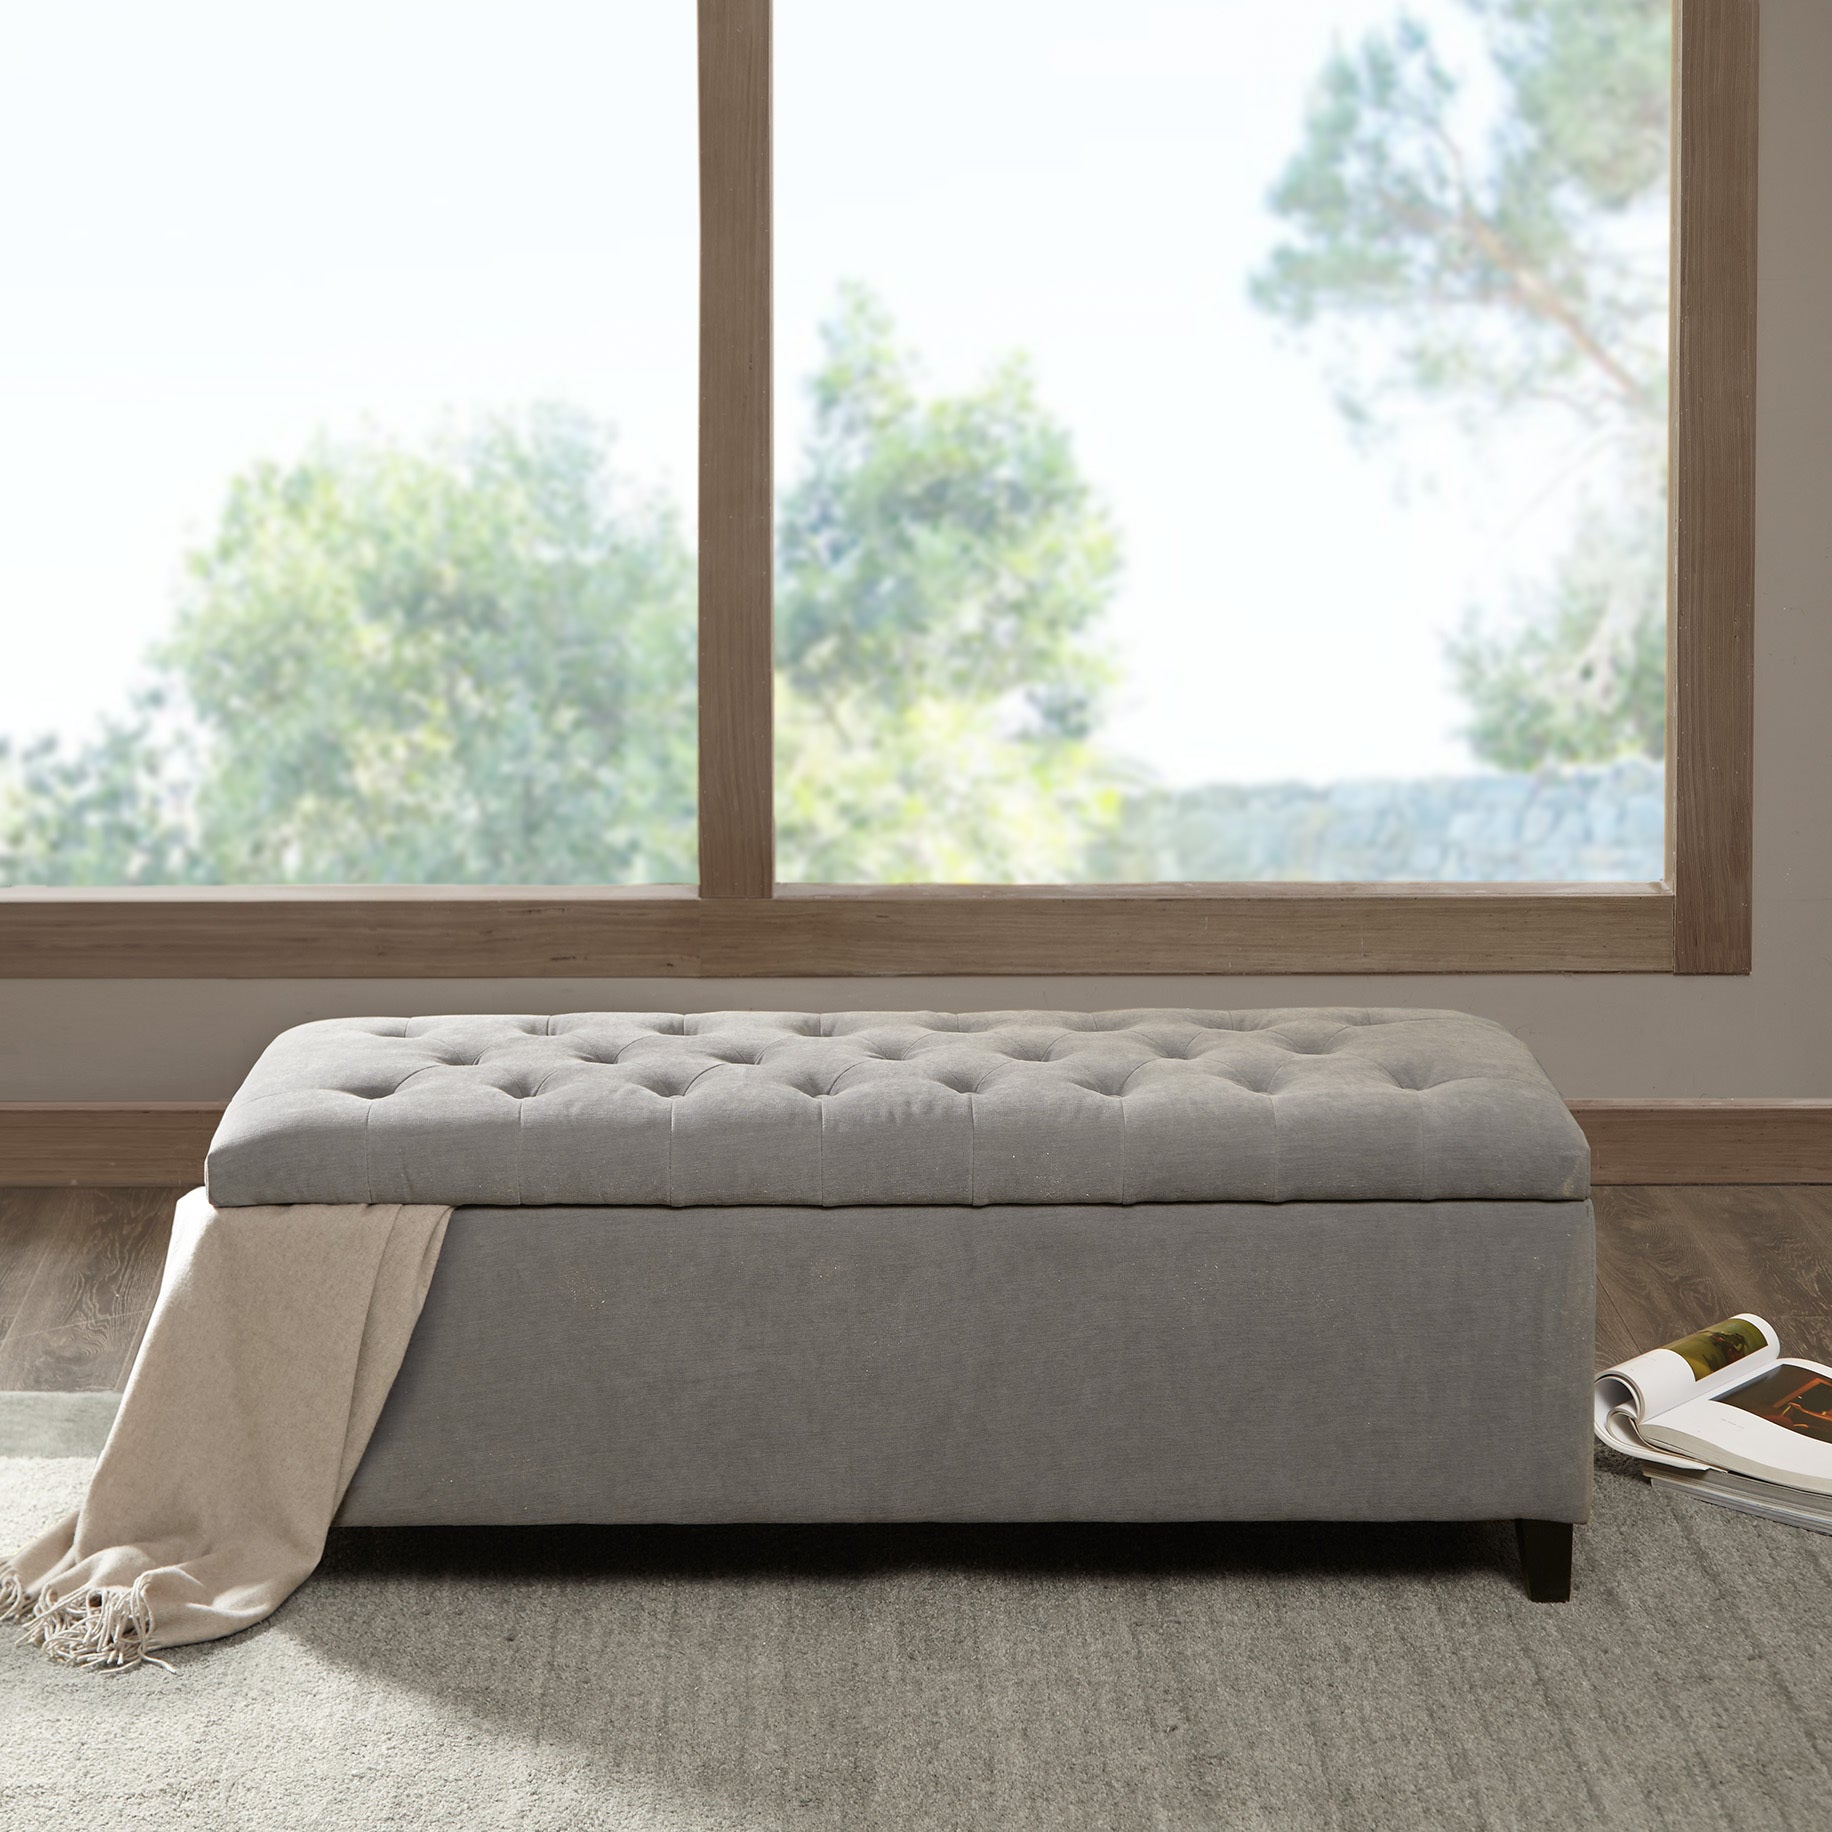 Tufted Top Soft Close Storage Bench grey-polyester